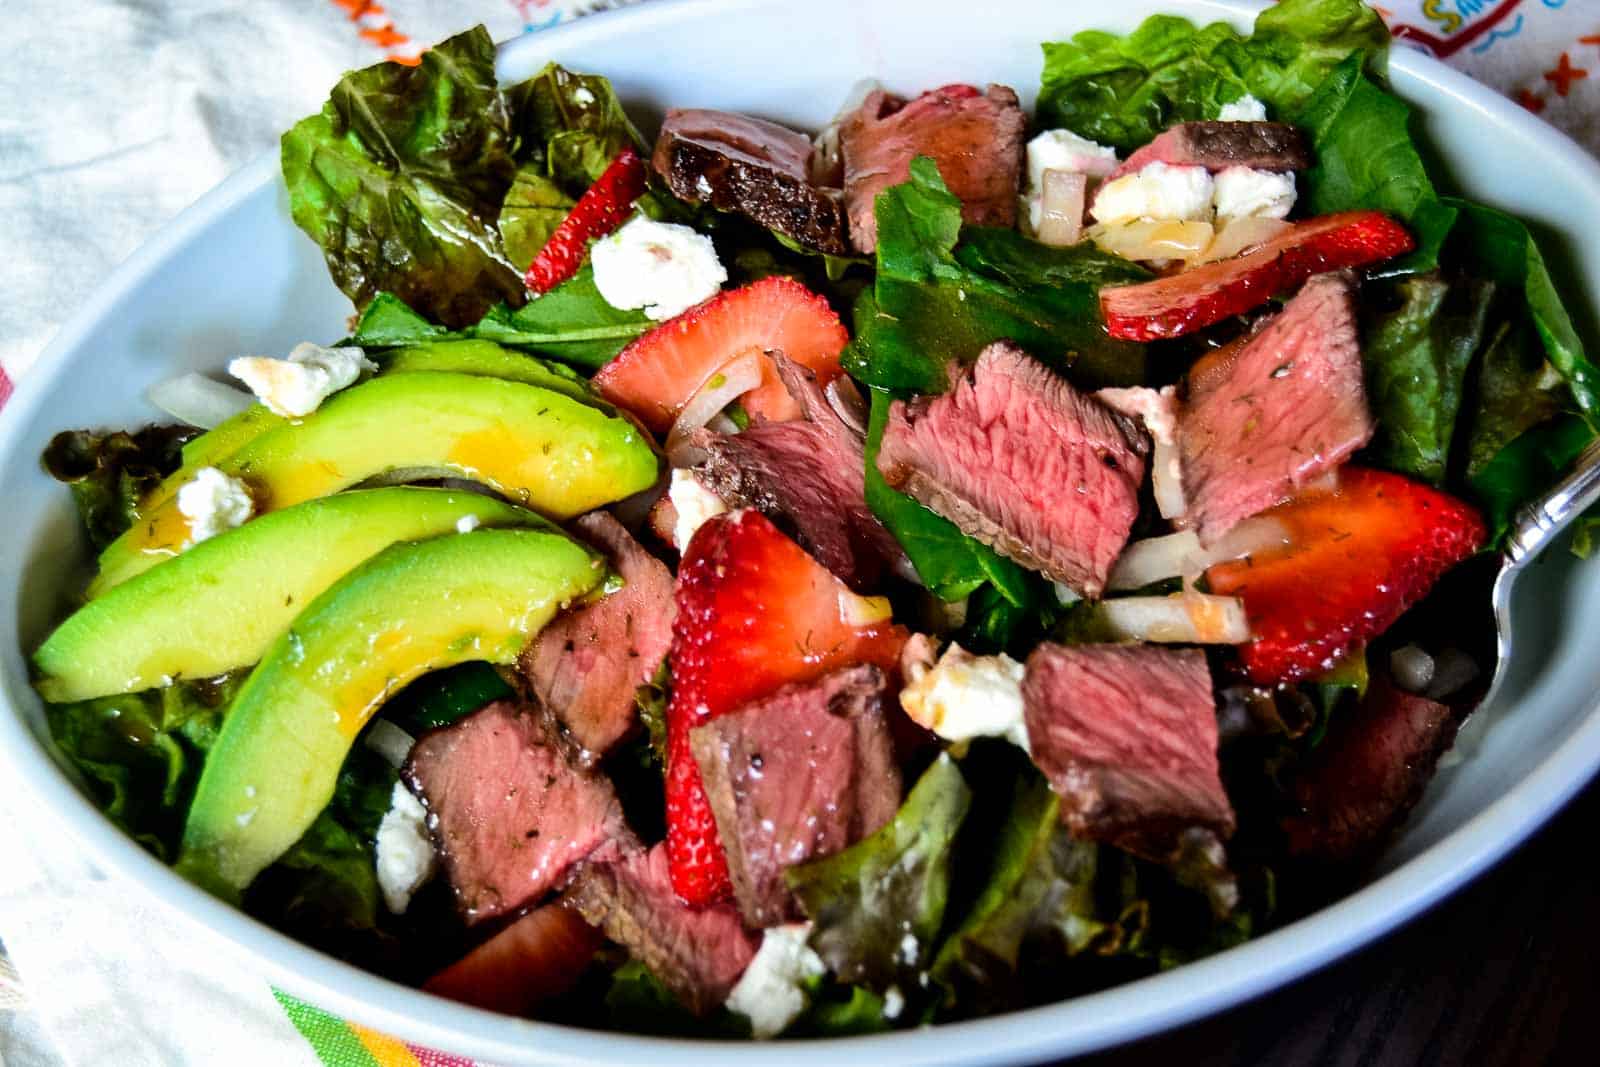 California steak salad with strawberries and avocados.